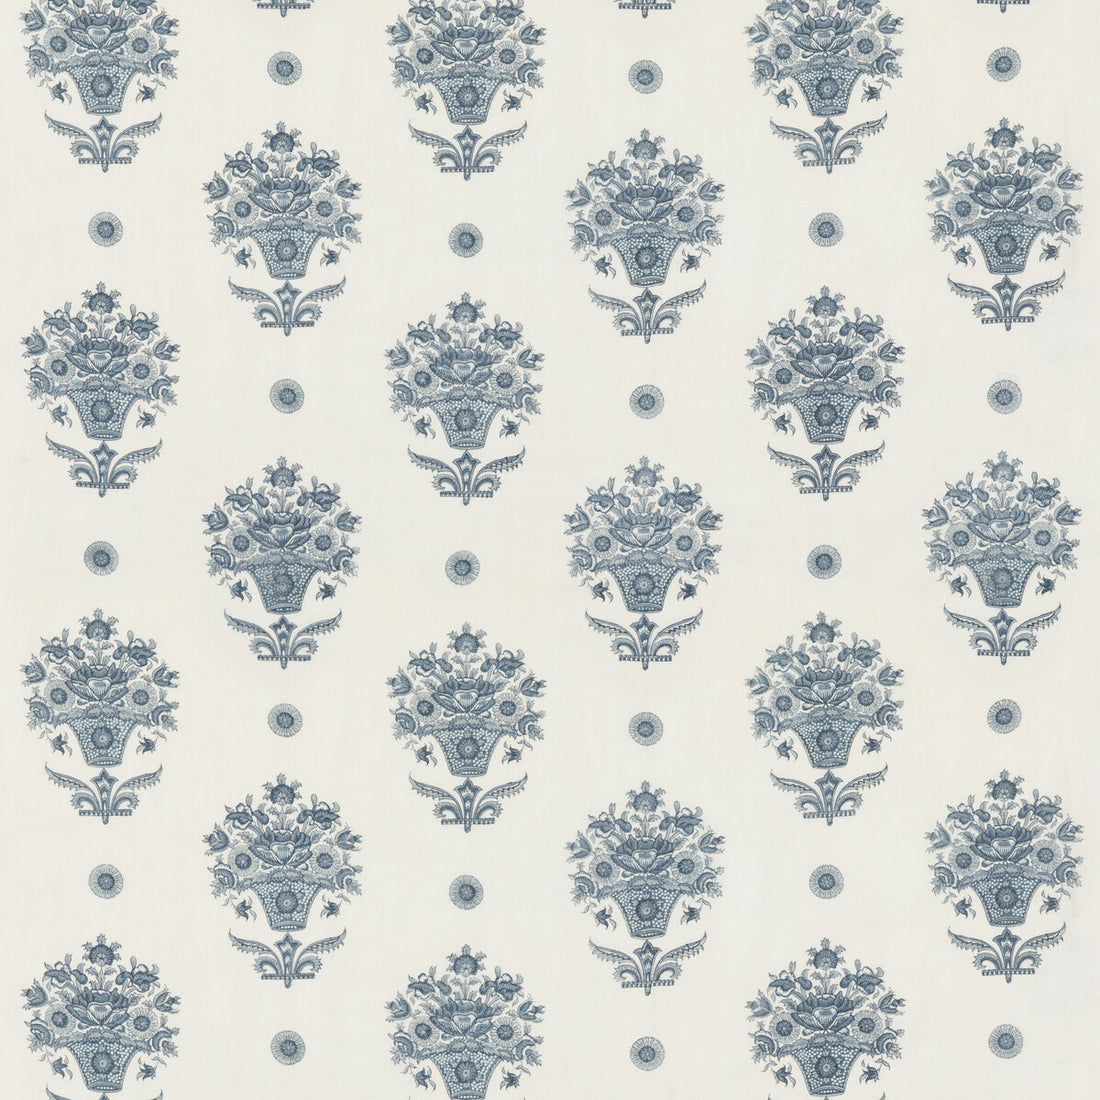 Pondicherry fabric in indigo color - pattern BP10913.1.0 - by G P &amp; J Baker in the Portobello collection